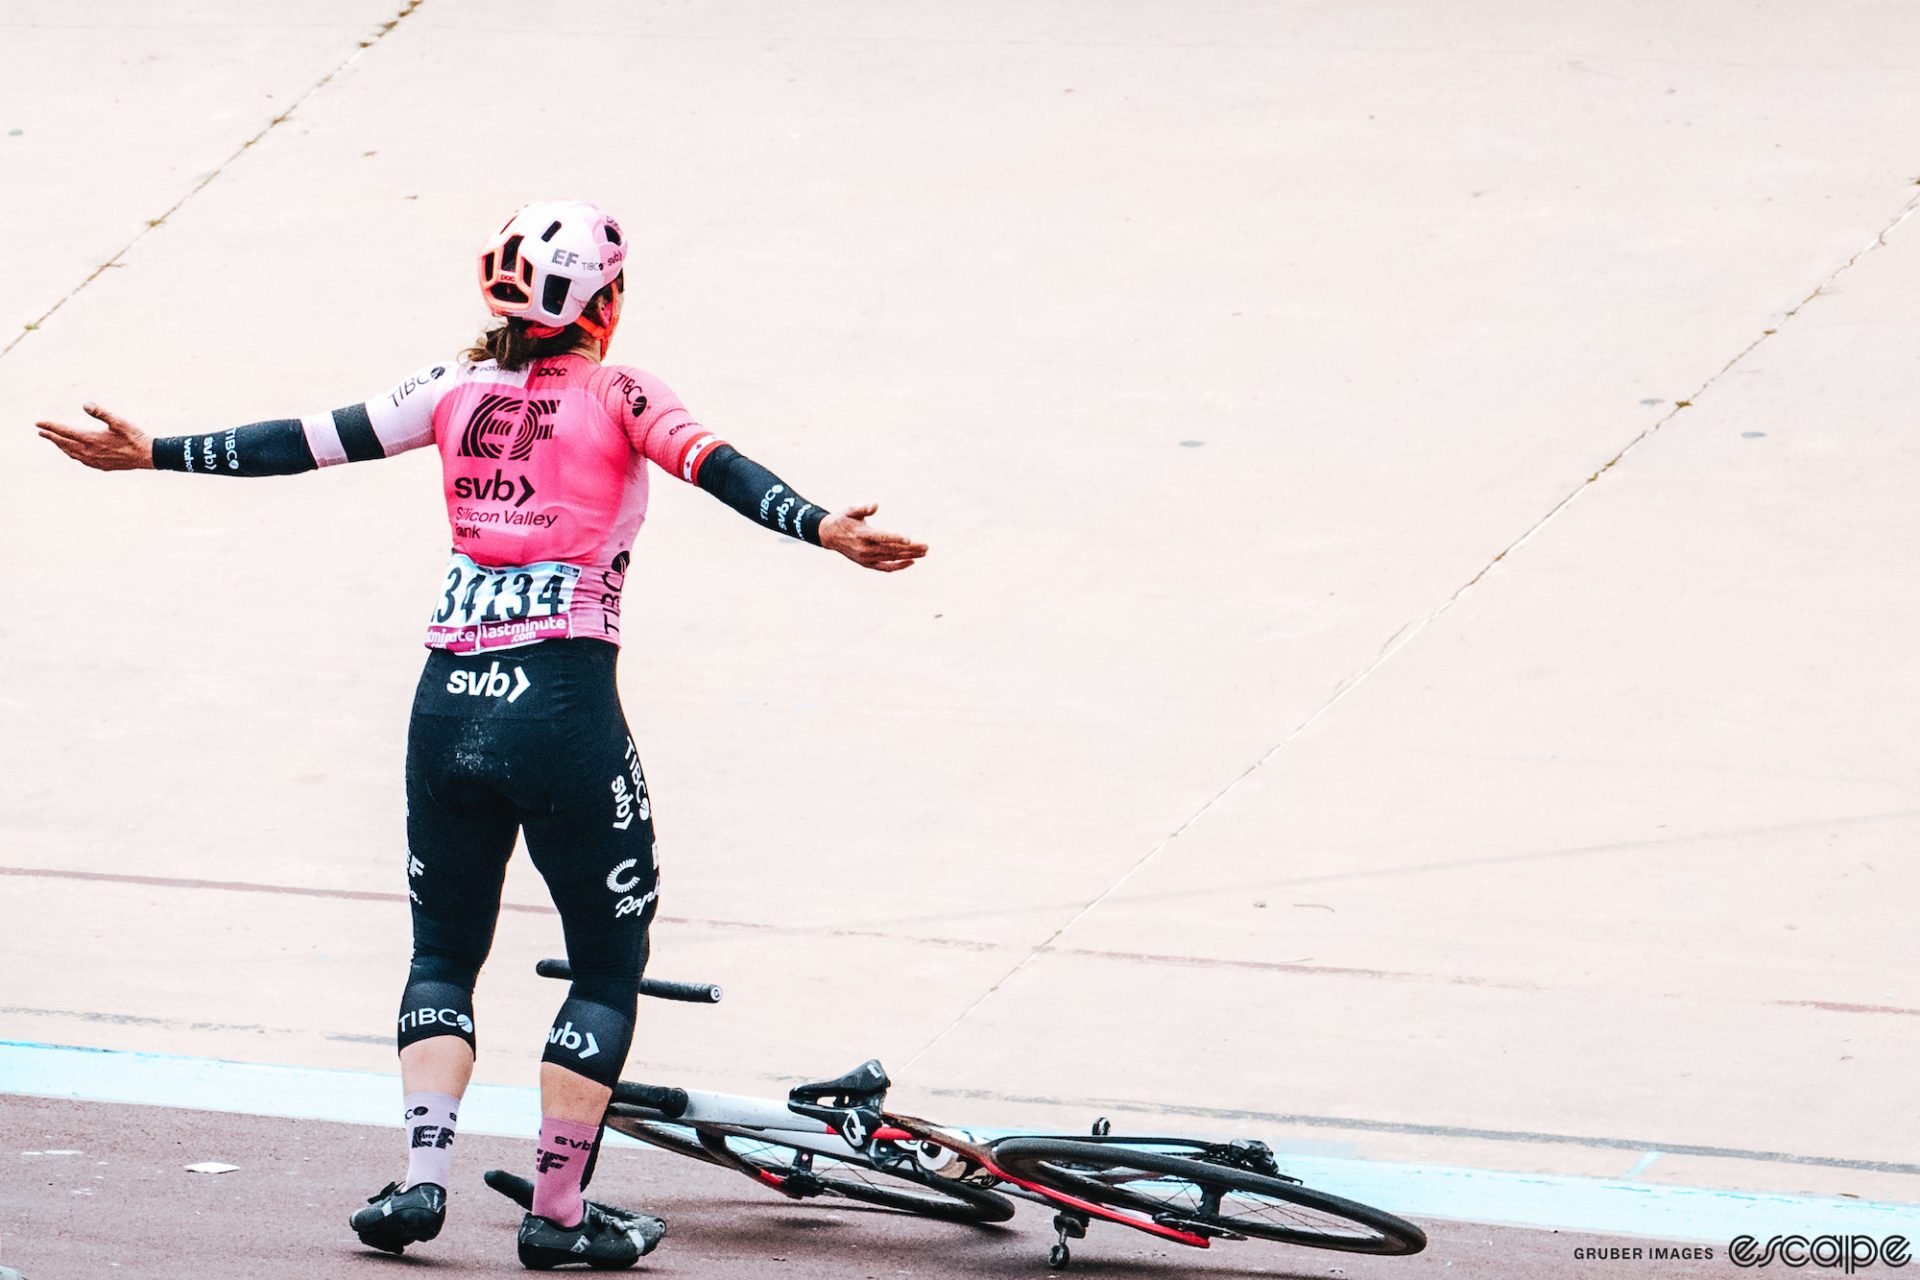 Alison Jackson holds her arms wide as she drops her bike in the Roubaix velodrome after winning the 2023 Paris-Roubaix in a sprint. Her gesture is one of showmanship and disbelief.